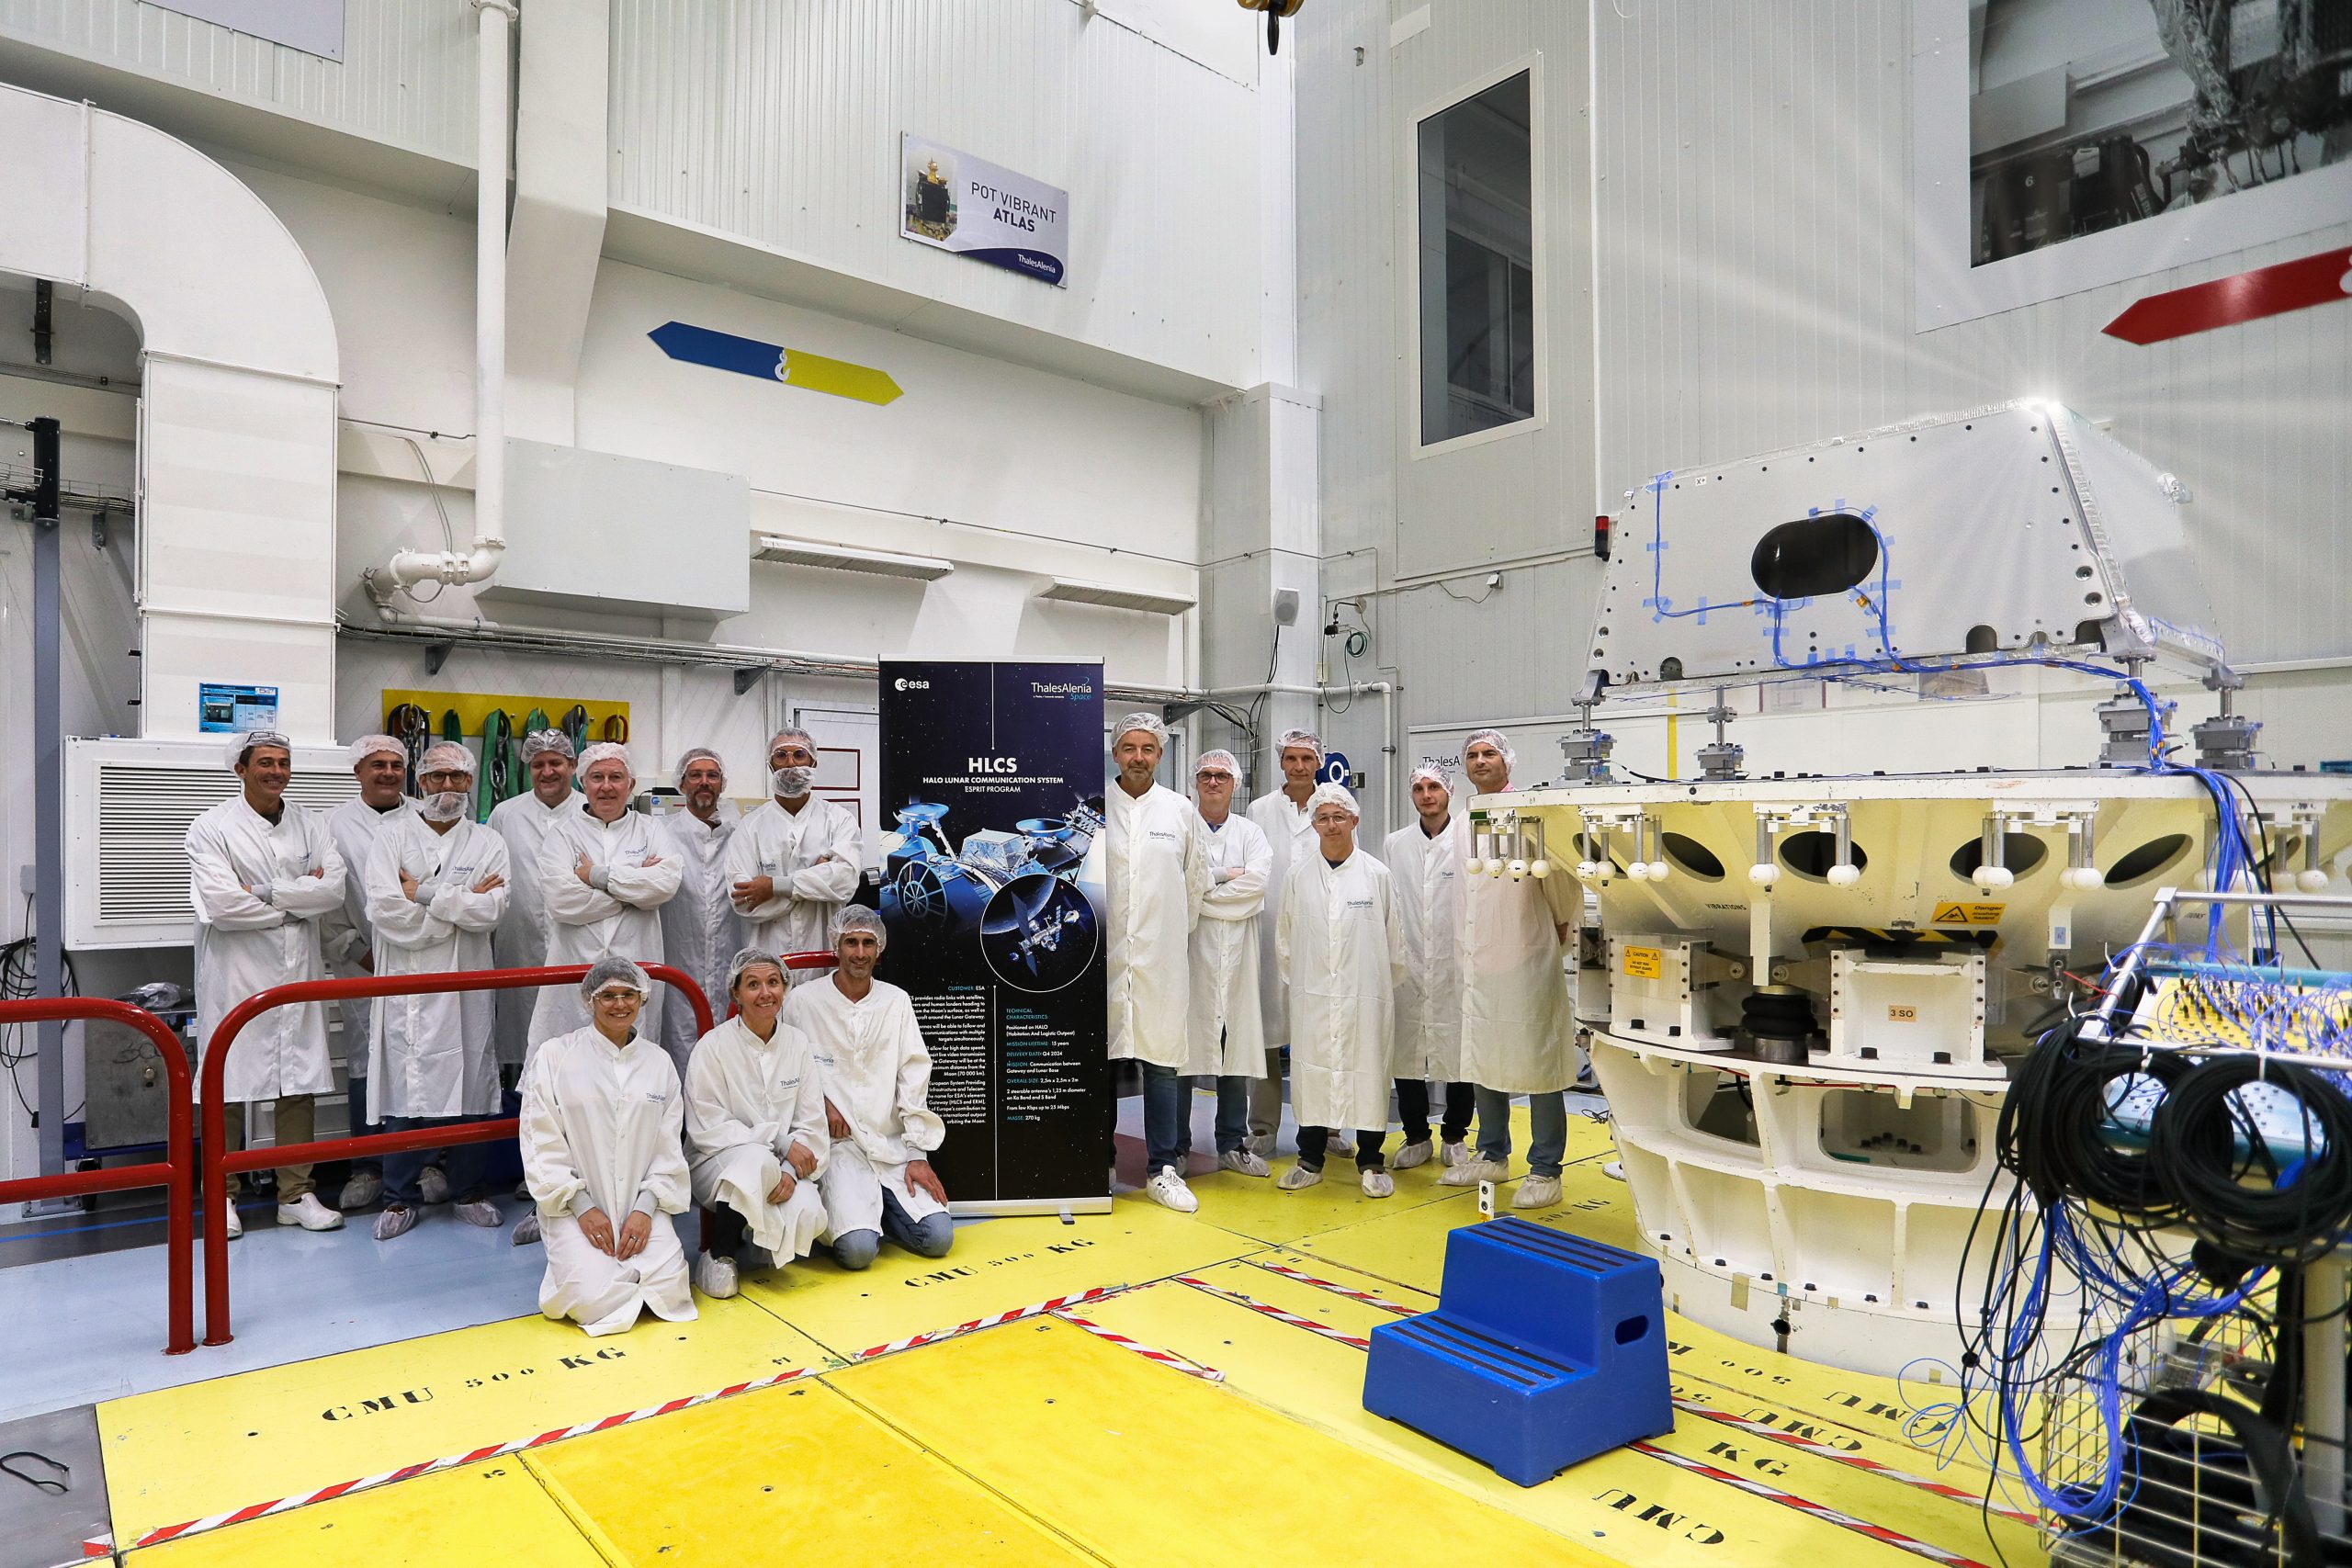 The team building and testing HLCS at Thales Alenia Space in Cannes, France. Credit: TAS